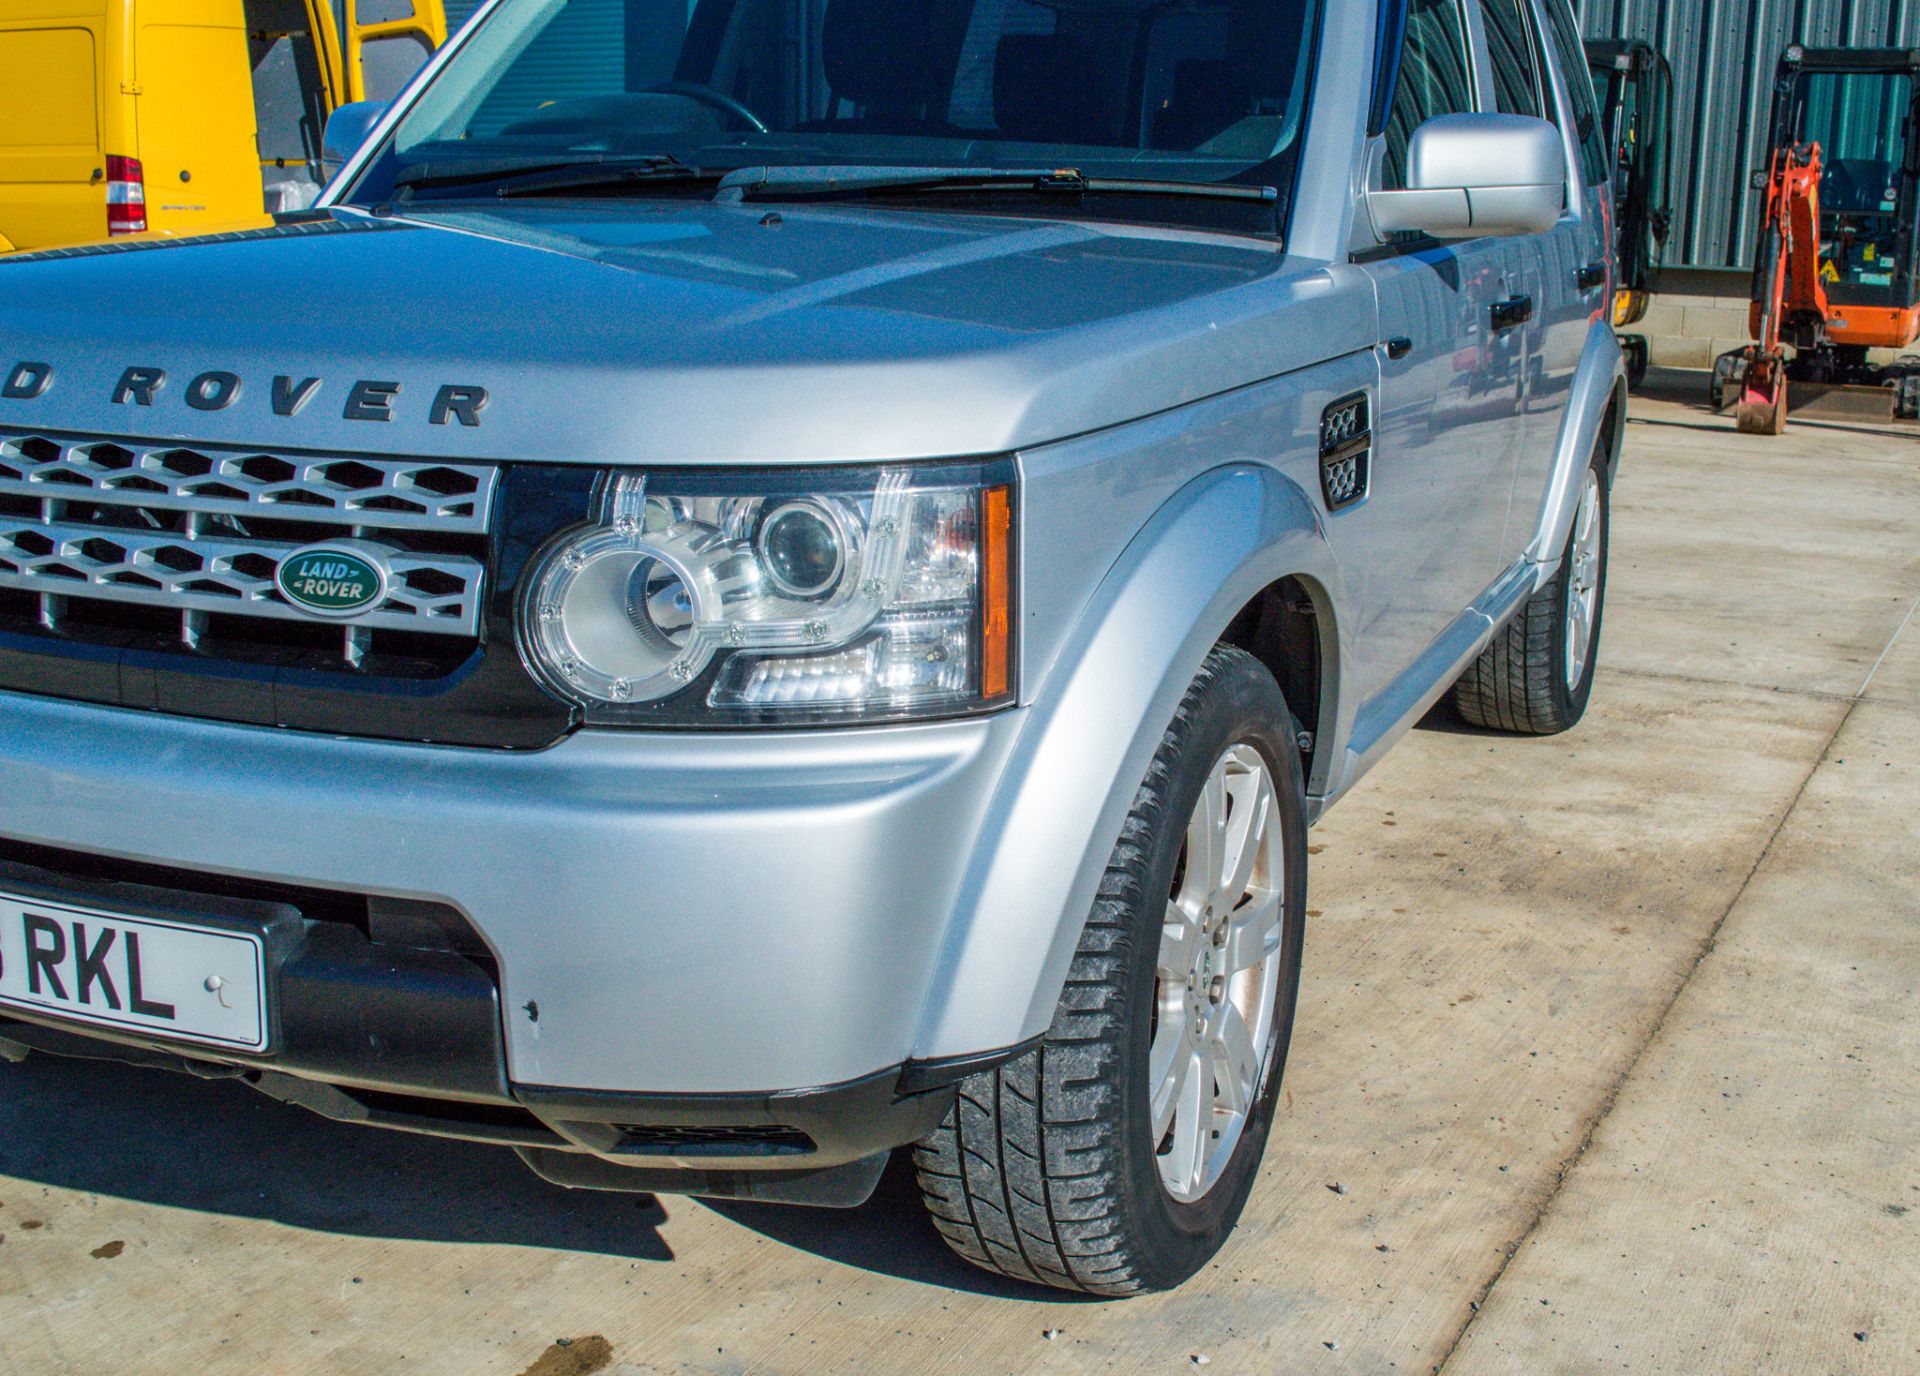 Land Rover Discovery 4 GS SDV6 3.0 diesel automatic estate car - Image 12 of 30